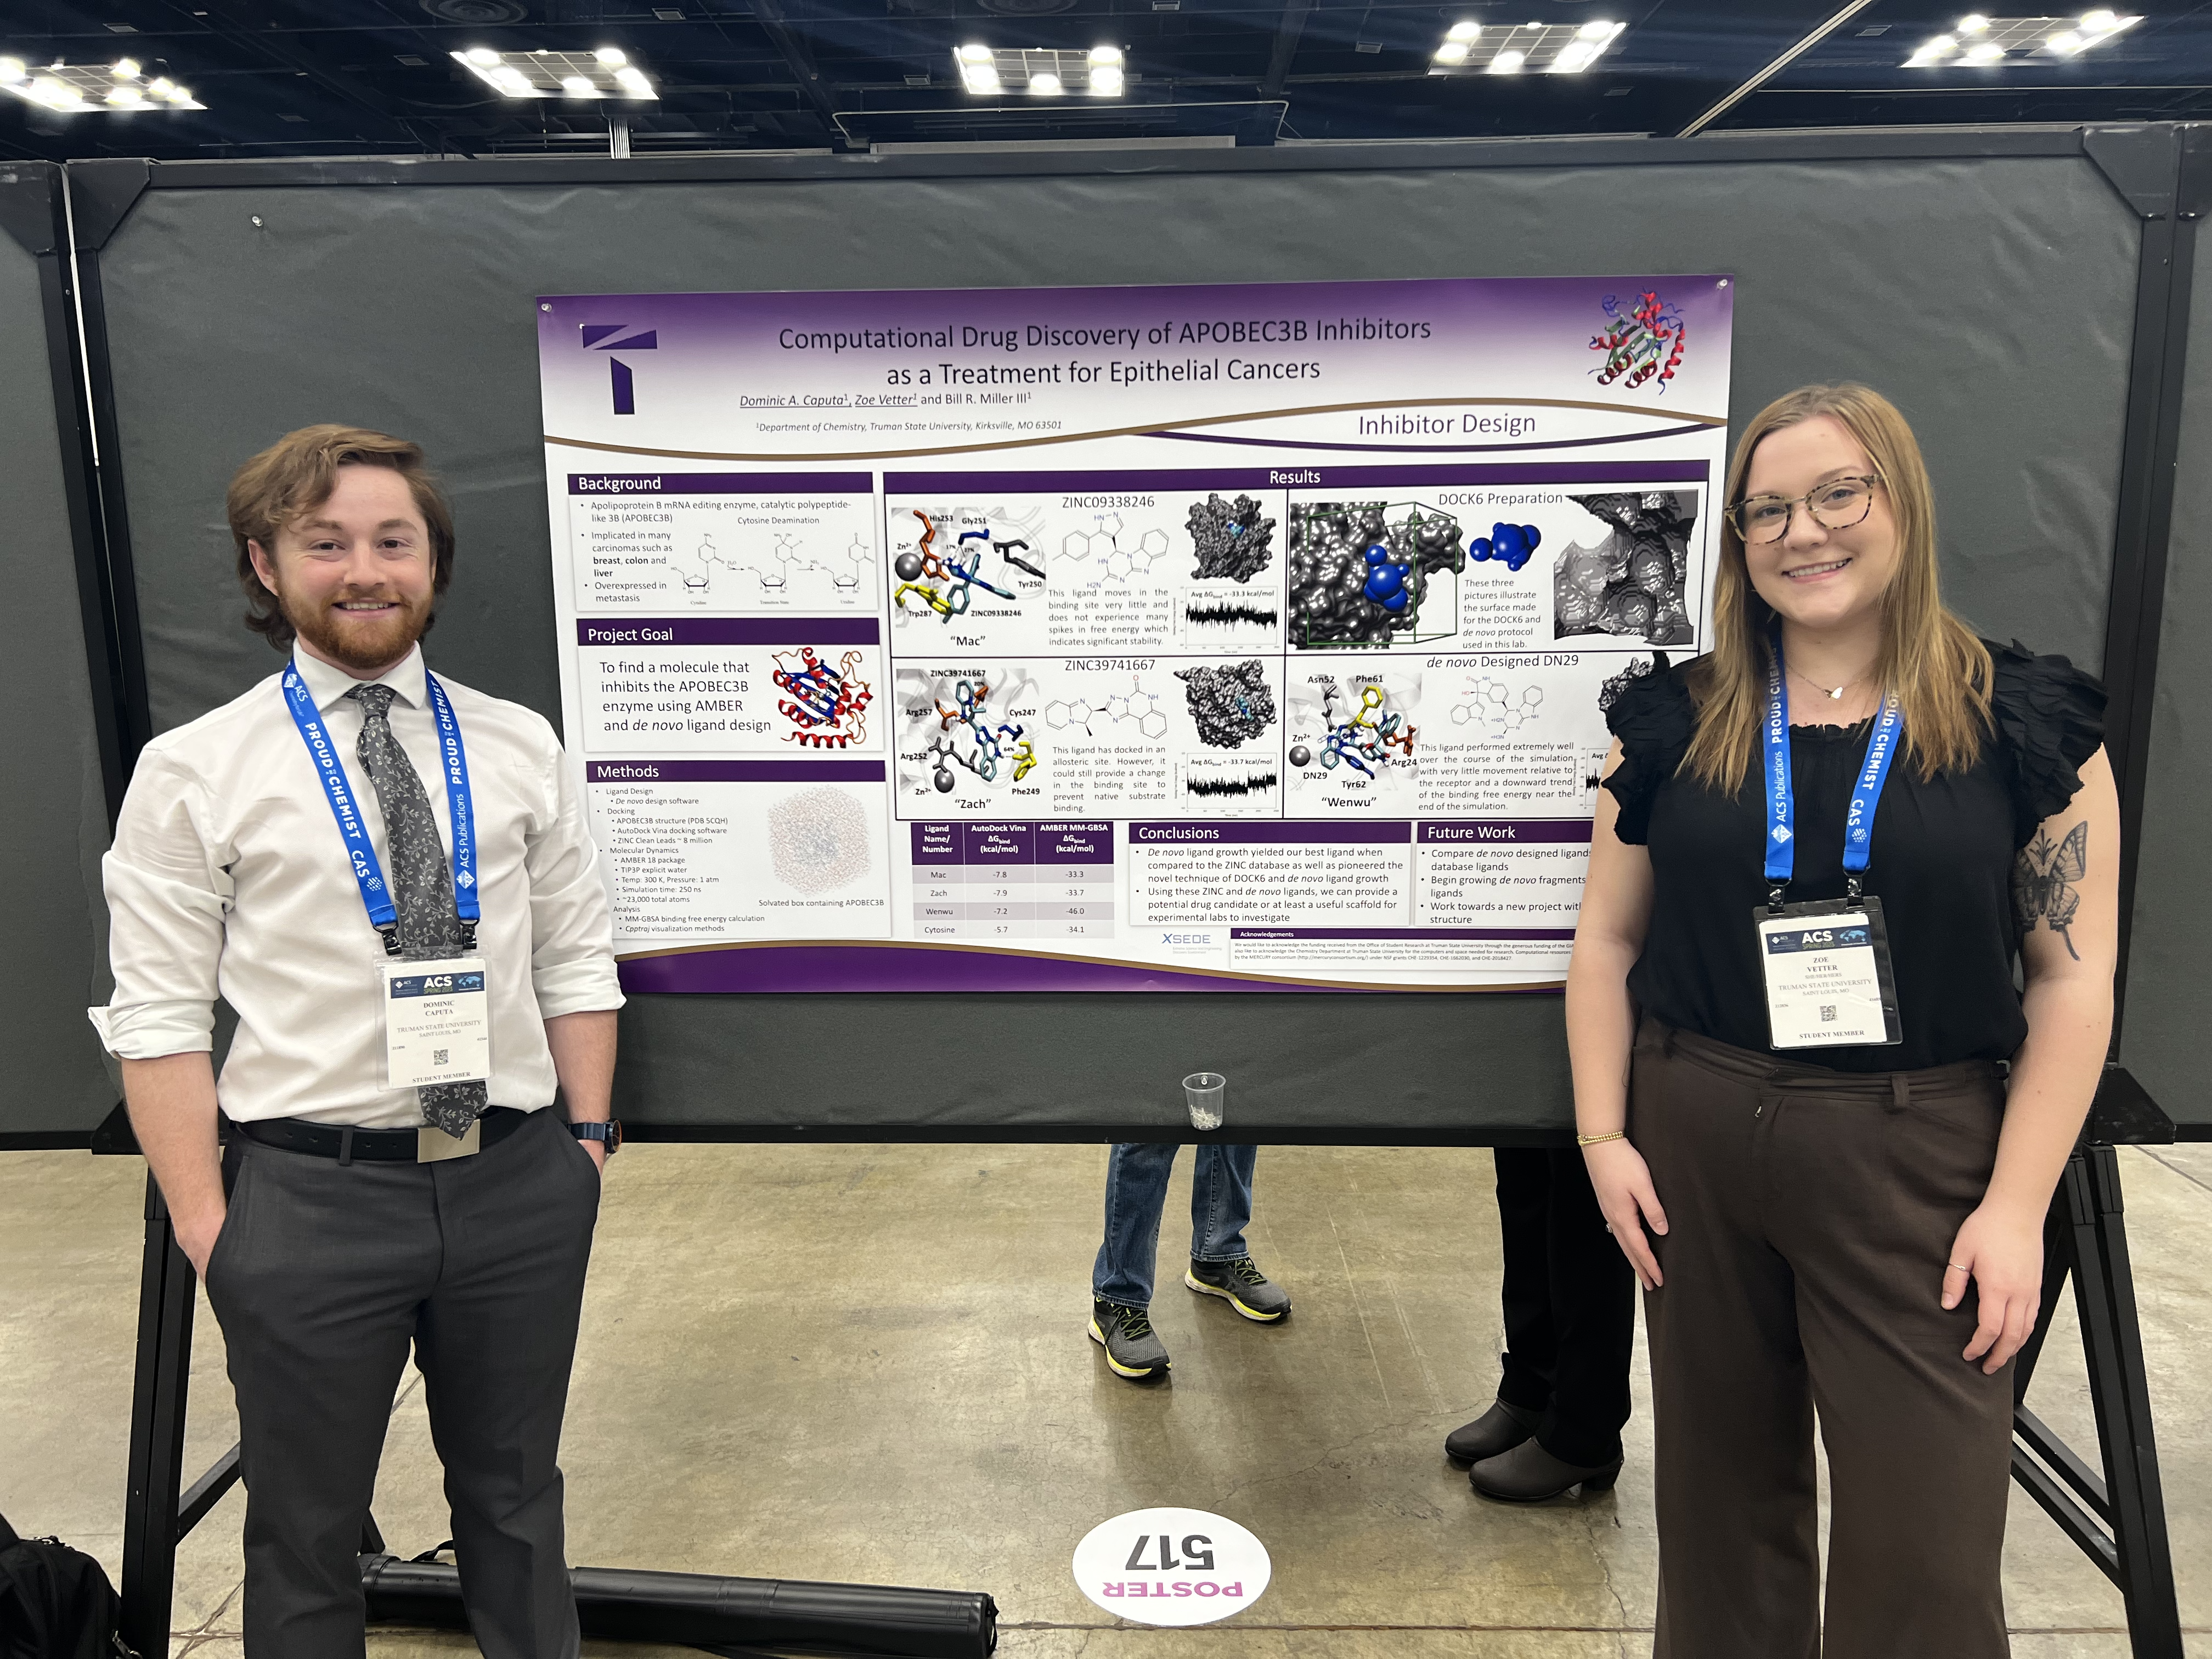 Dominic (left) and Zoe (right) in front of their poster on APOBEC3B